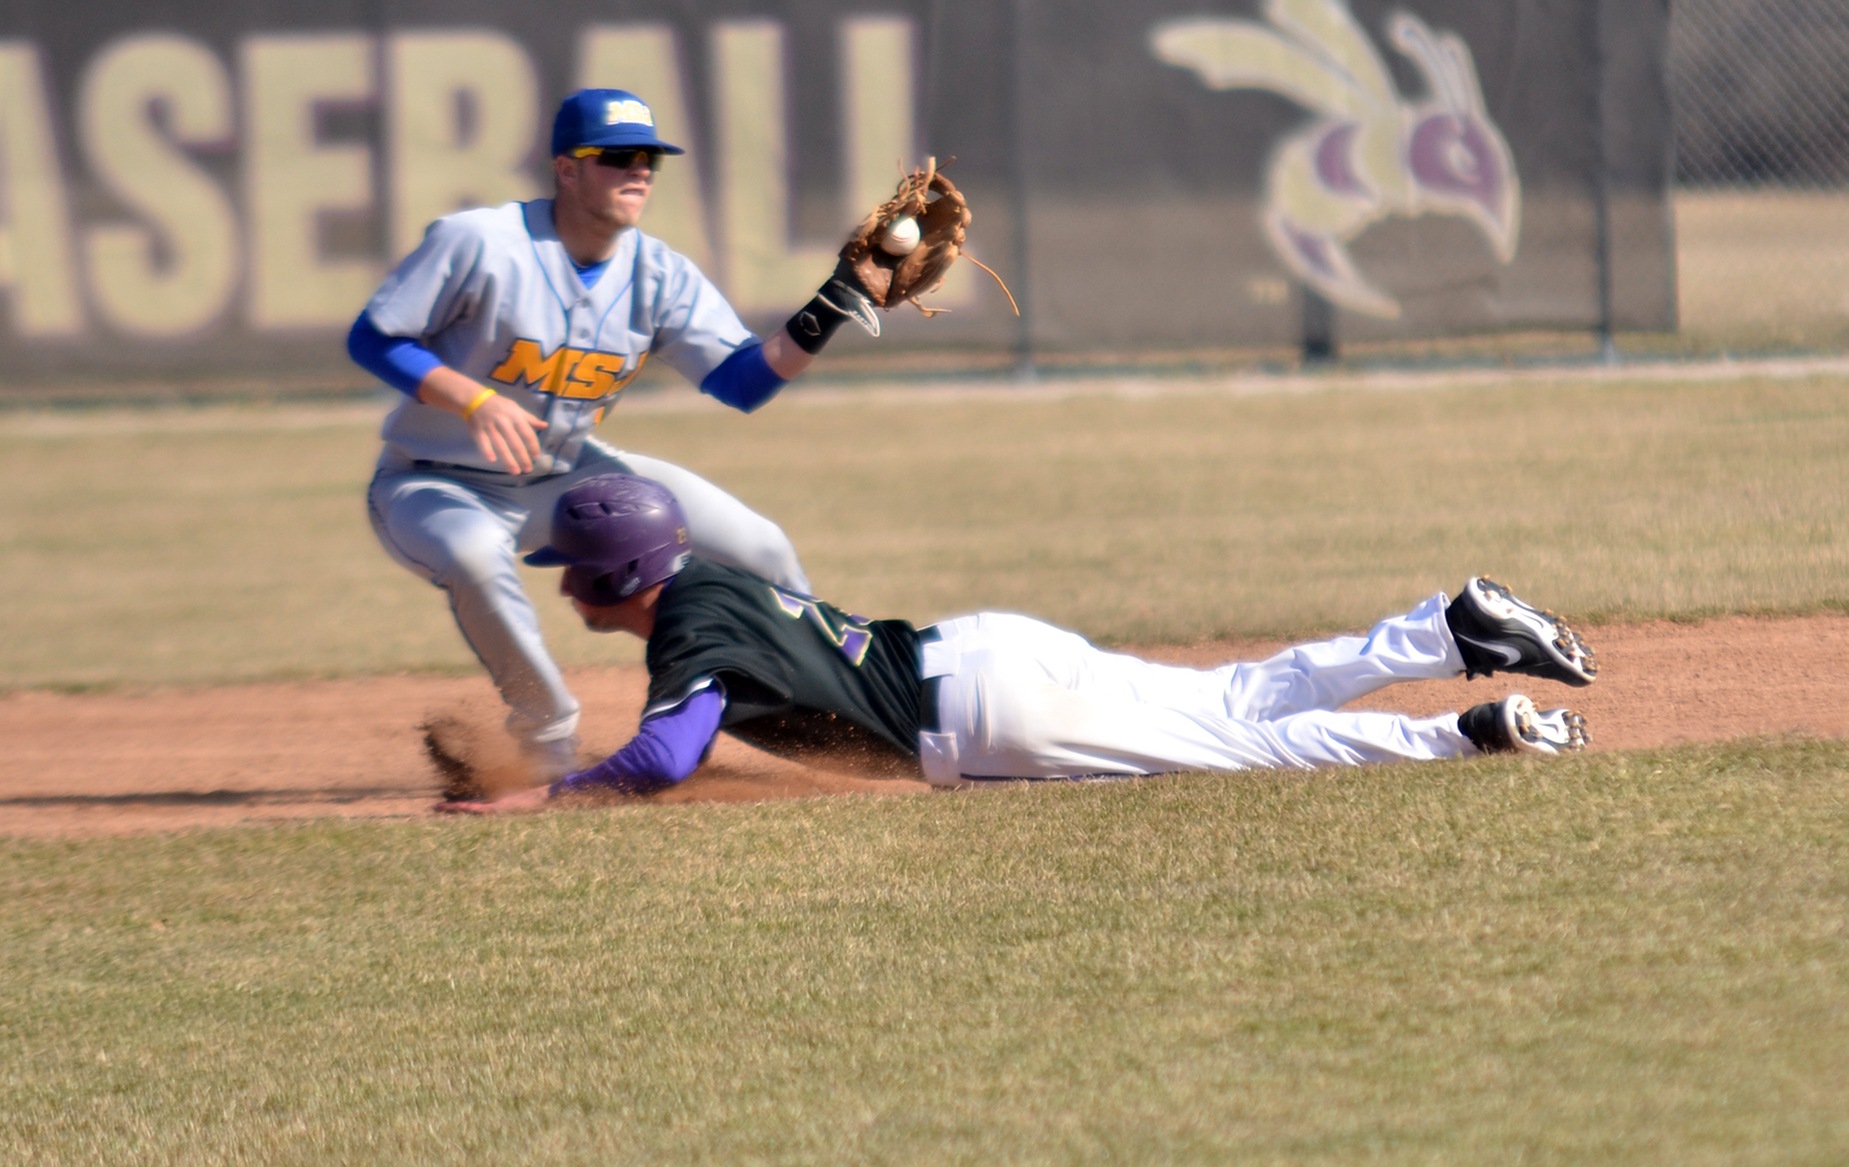 DC Ends Season With a Narrow 5-4 Defeat in HCAC Tourney